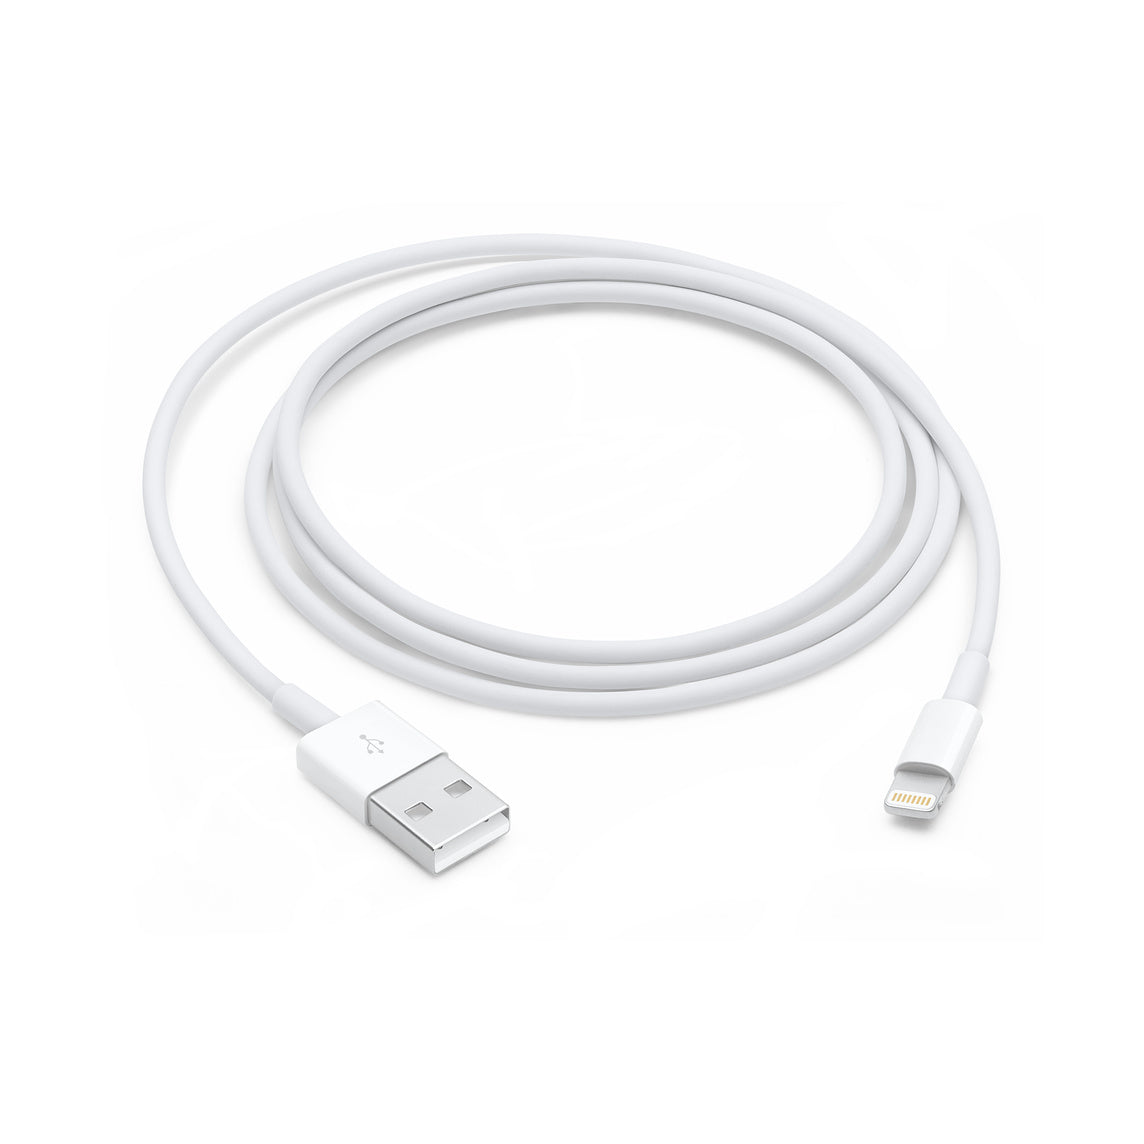 Original Apple iPhone Cable Lightning To USB For IPhone IPad IPod 2 Meter + 1 Meter - Combo Pack 3